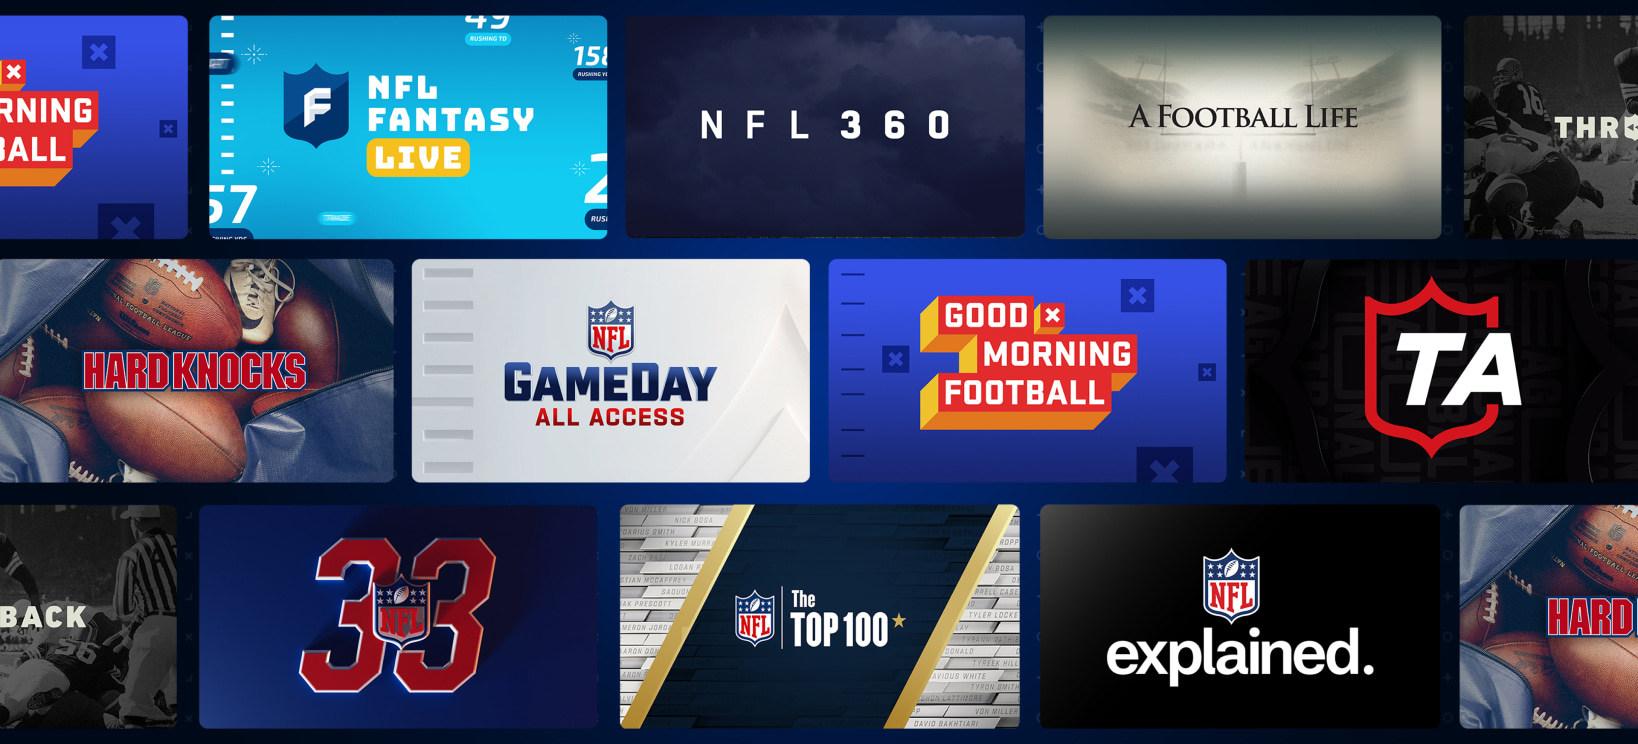 Get the Best NFL Content on Demand